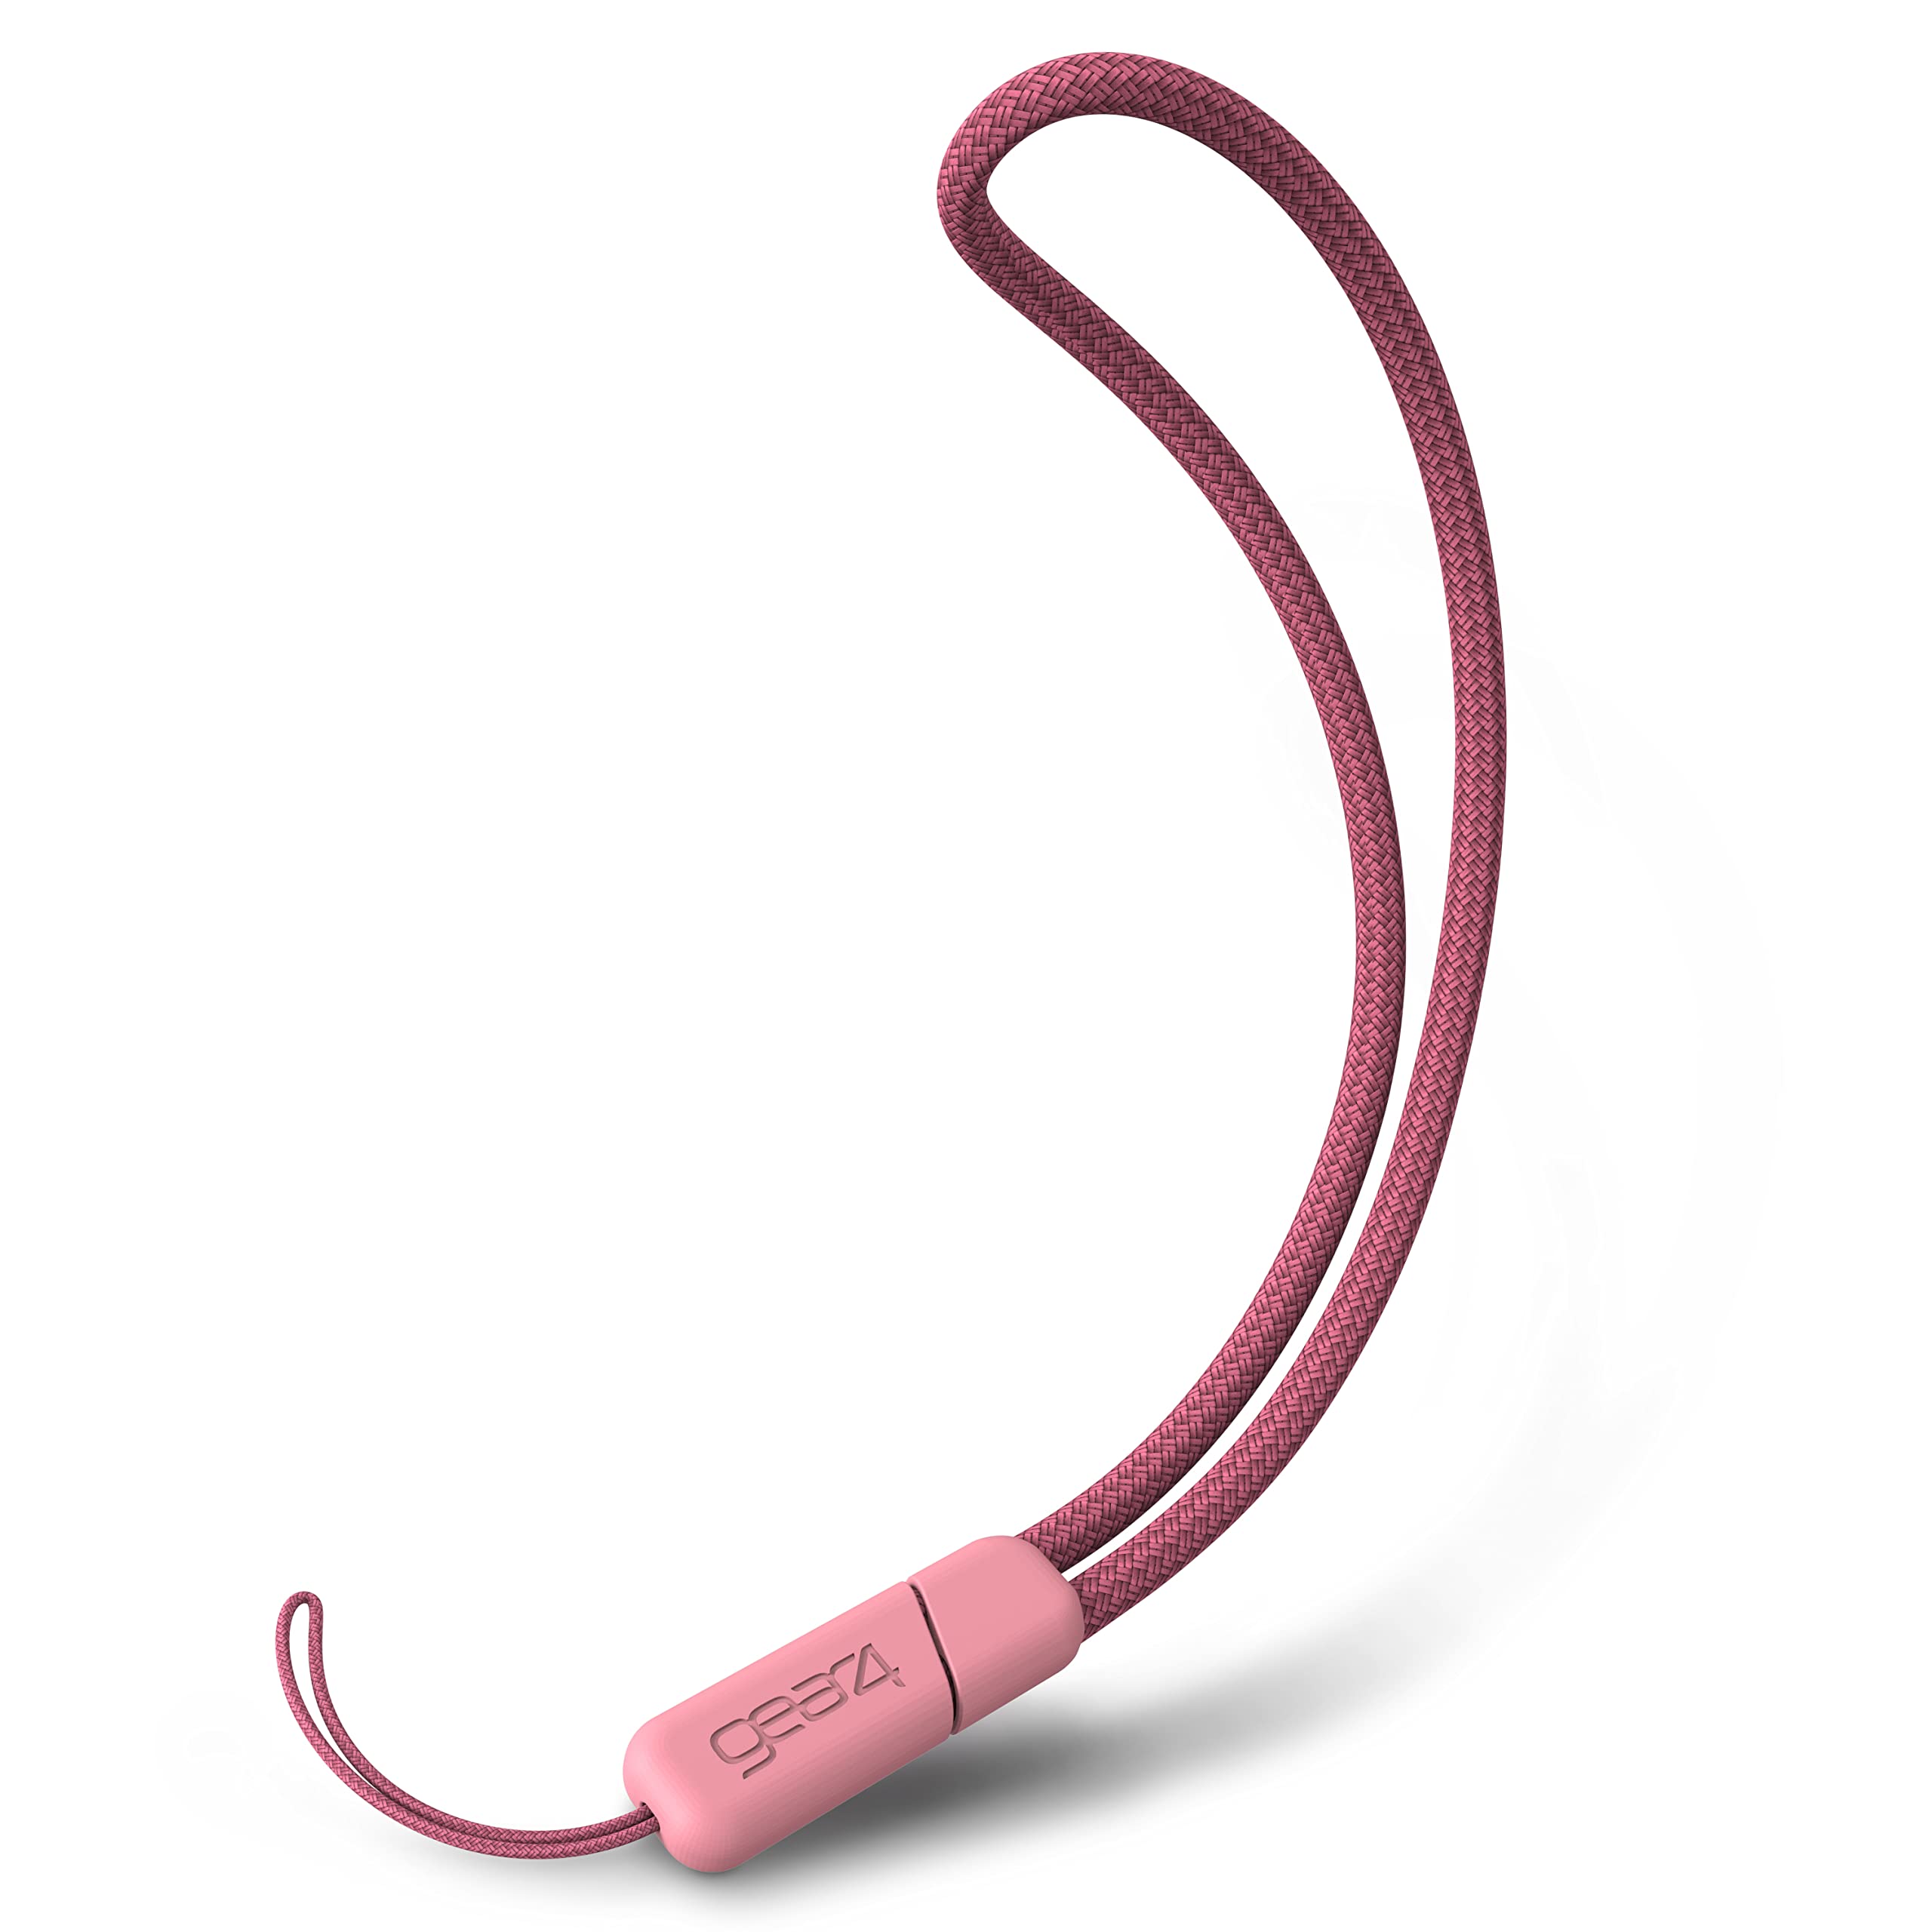 ZAGG Gear4 Eco-Friendly Durable Braided Nylon Cell Phone Wrist Lanyard with Easy Attach Loop - Pink